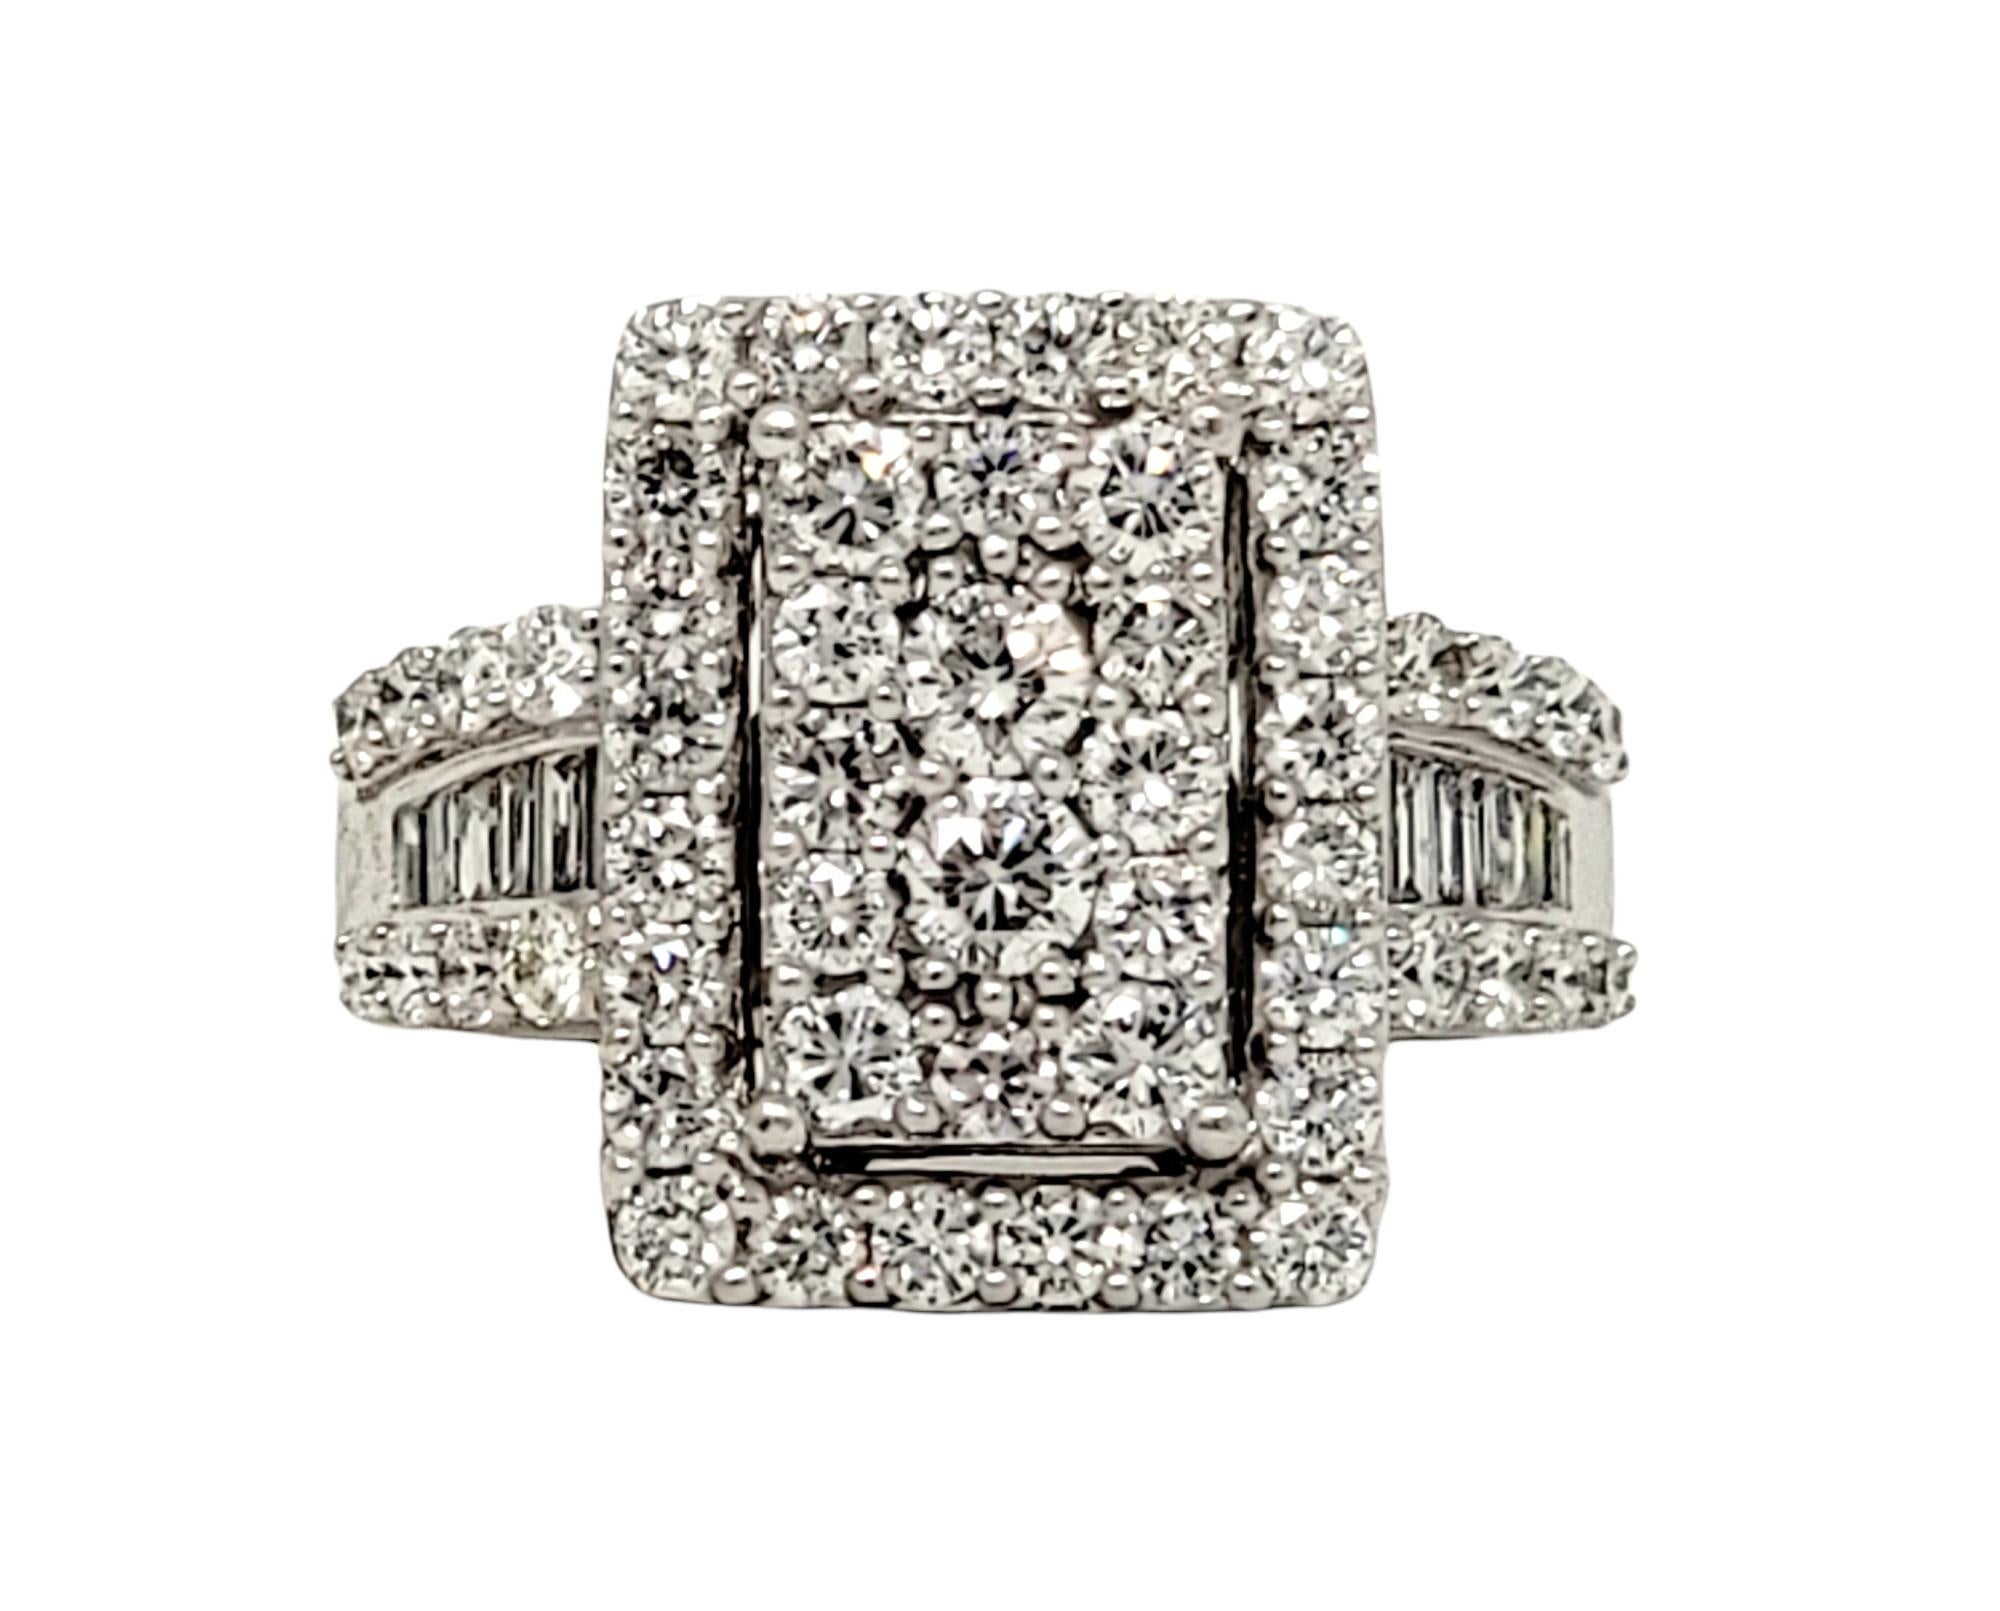 Ring size: 5.25

This stunningly sparkly diamond cluster ring makes an extravagant statement on the finger. Natural round brilliant and baguette diamonds fill this gorgeous piece from end to end, shimmering and shining from every angle. A multi-row